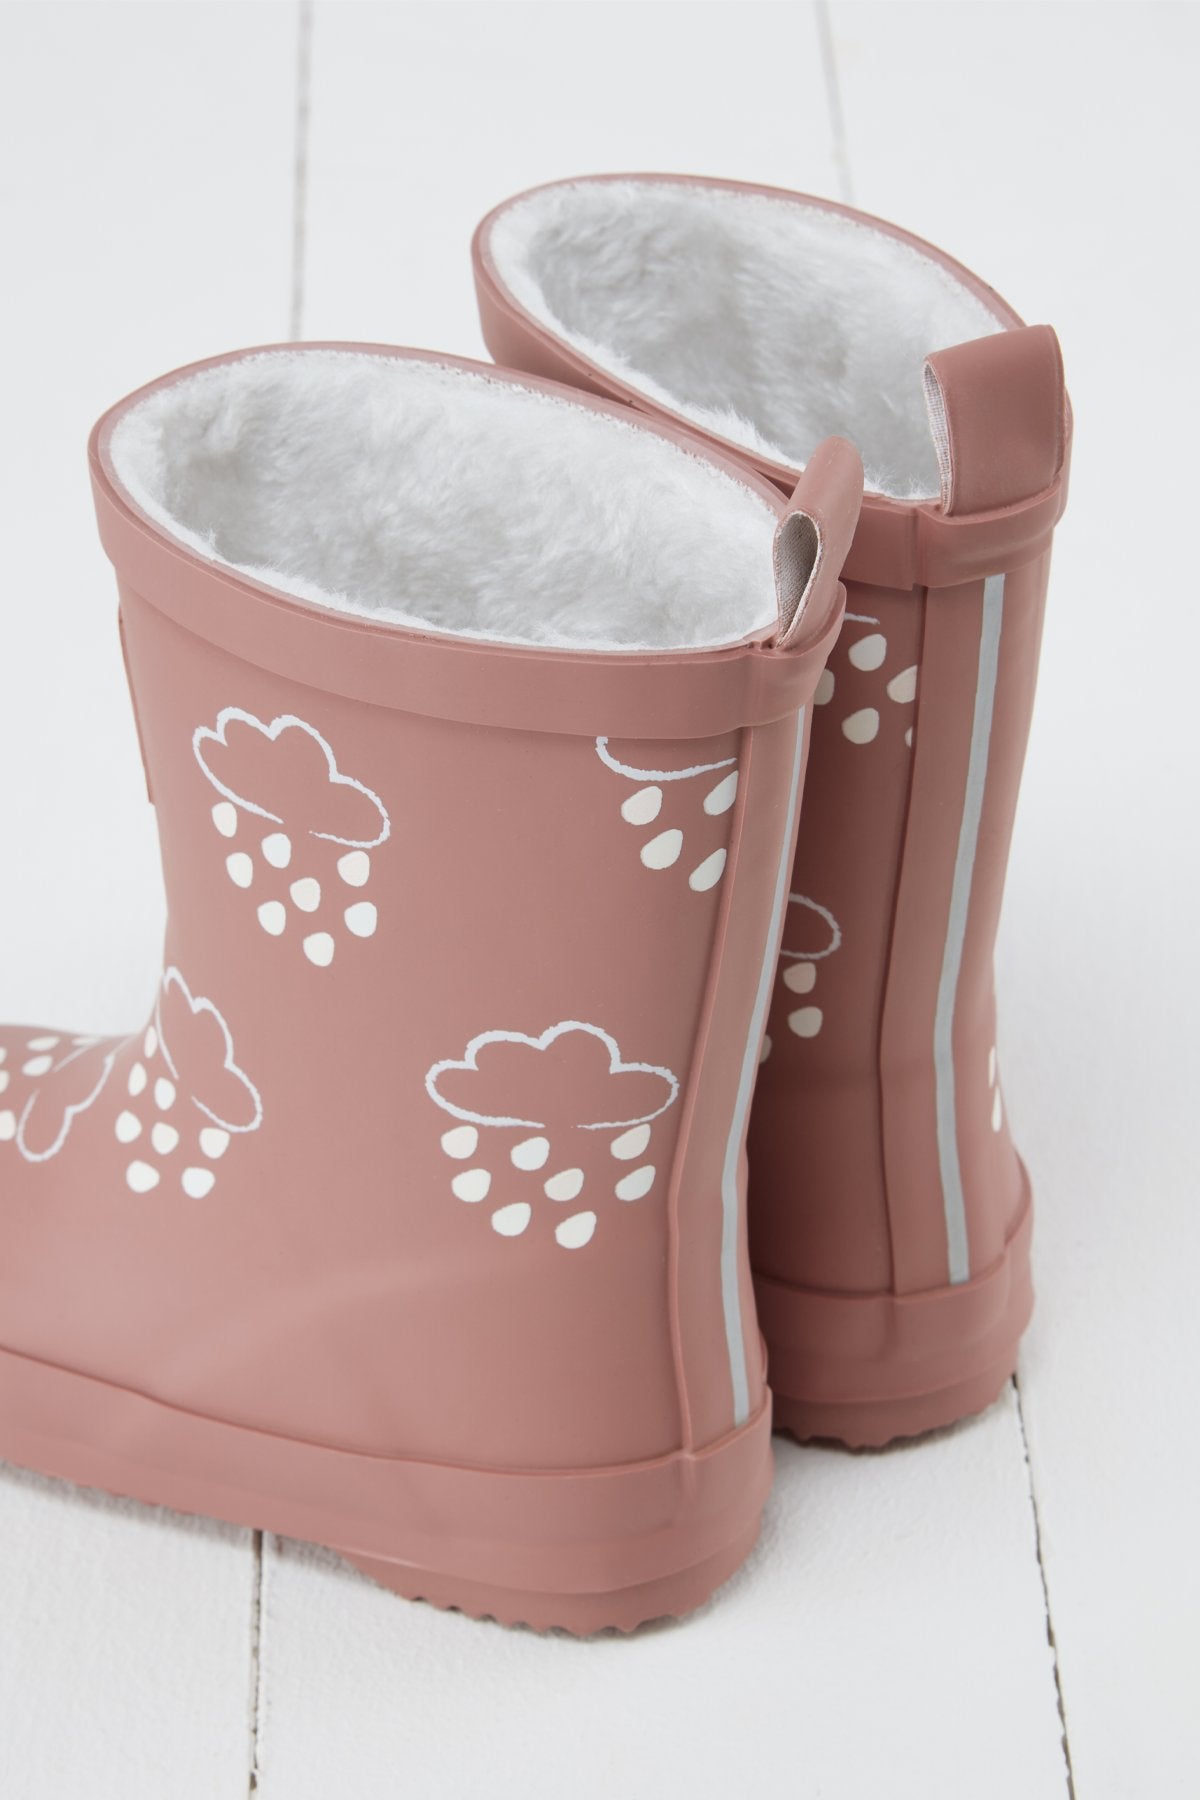 Rose Colour-Changing Kids Wellies with Teddy Fleece Lining